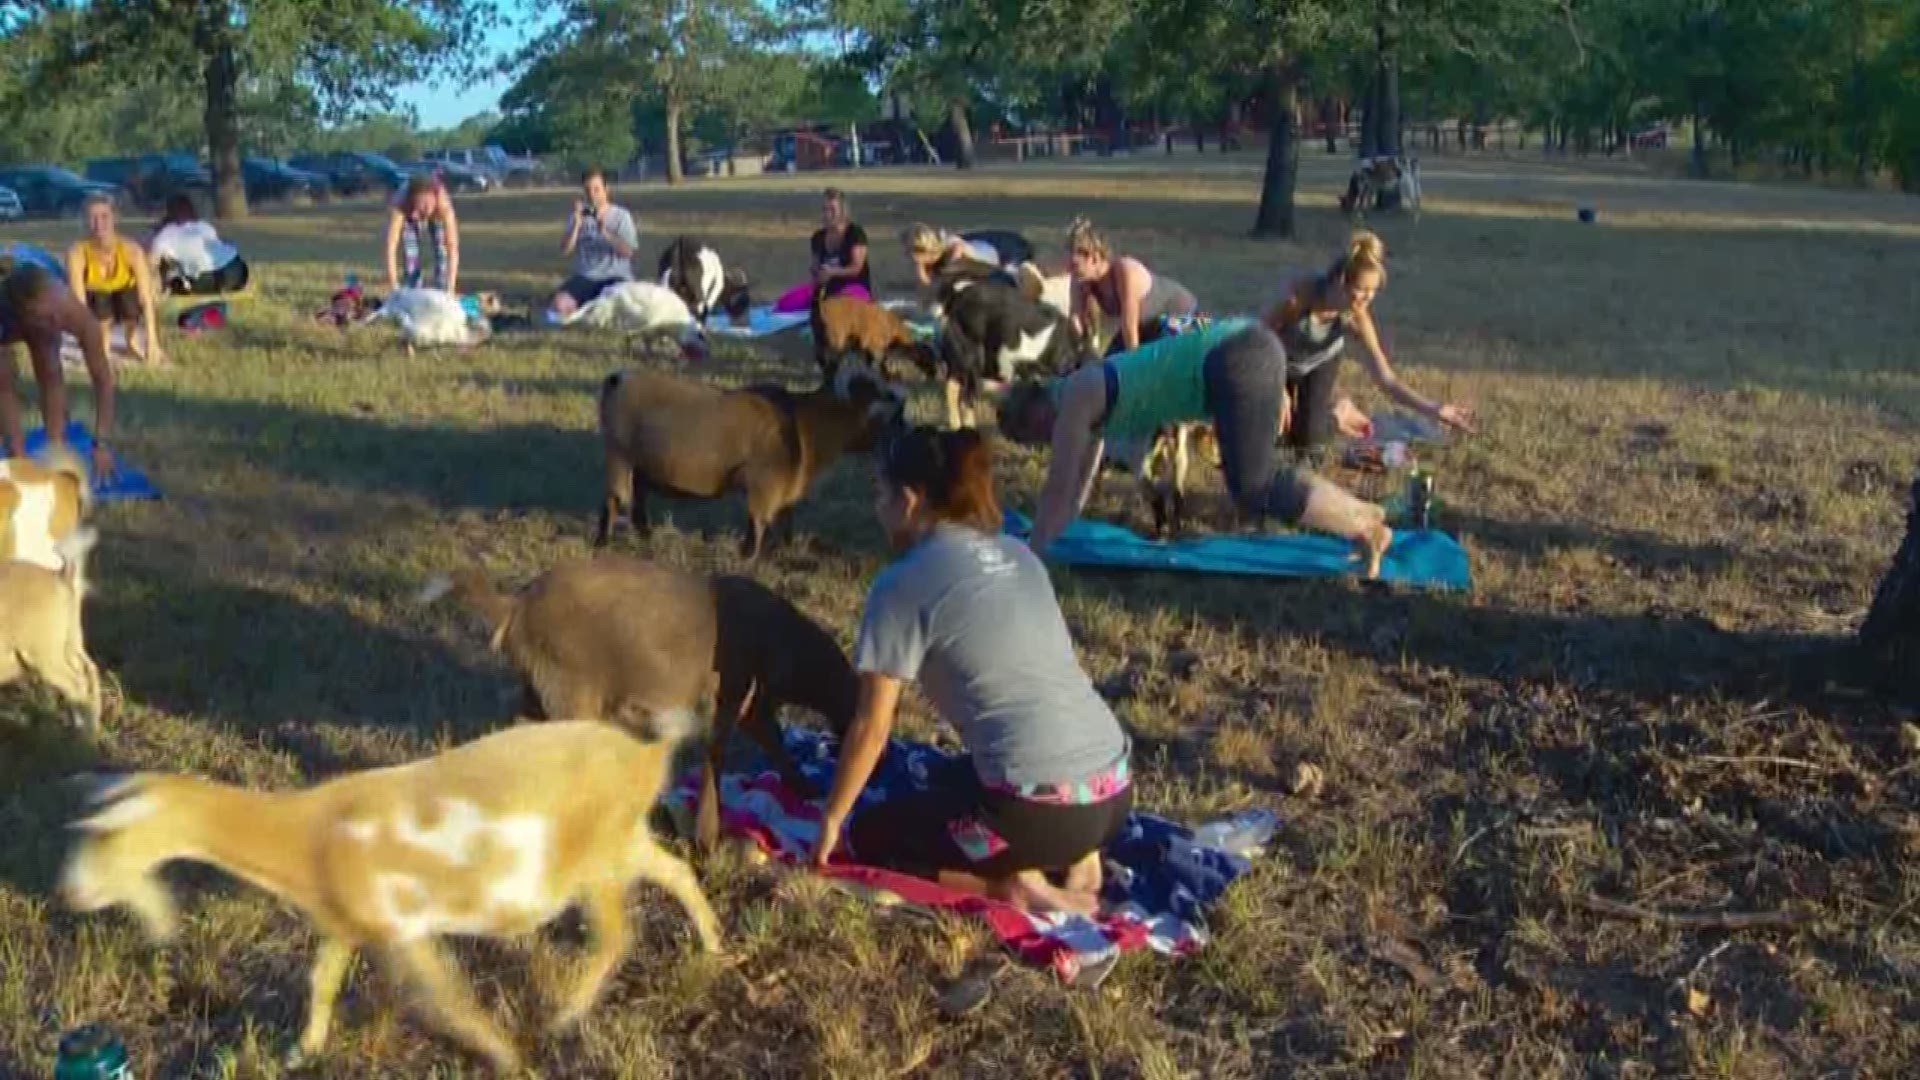 There are a lot of variations of yoga -- but one trend that's growing is goat yoga.